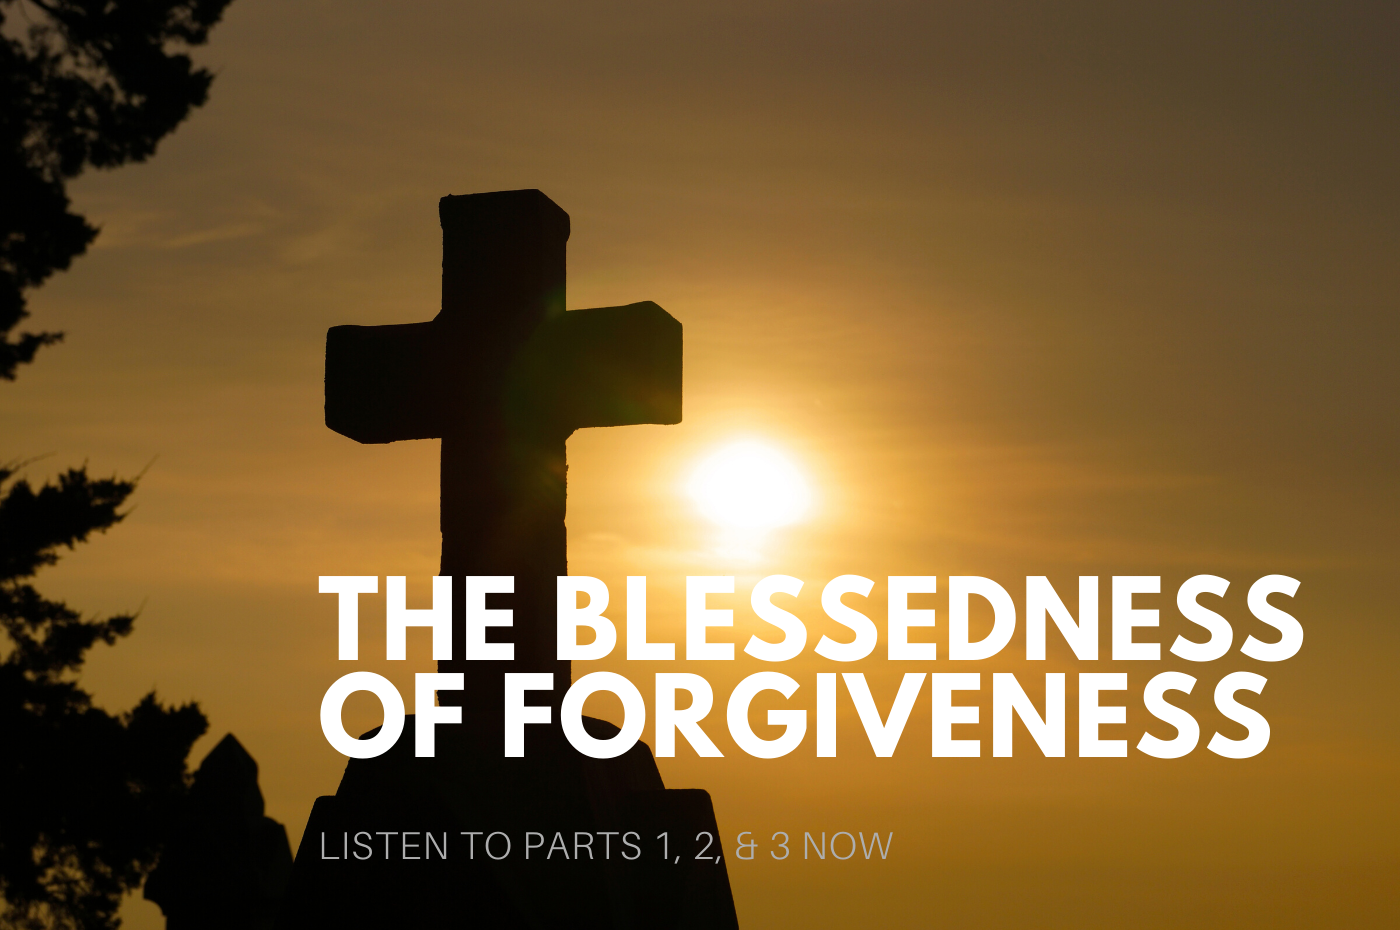 The Blessedness of Forgiveness